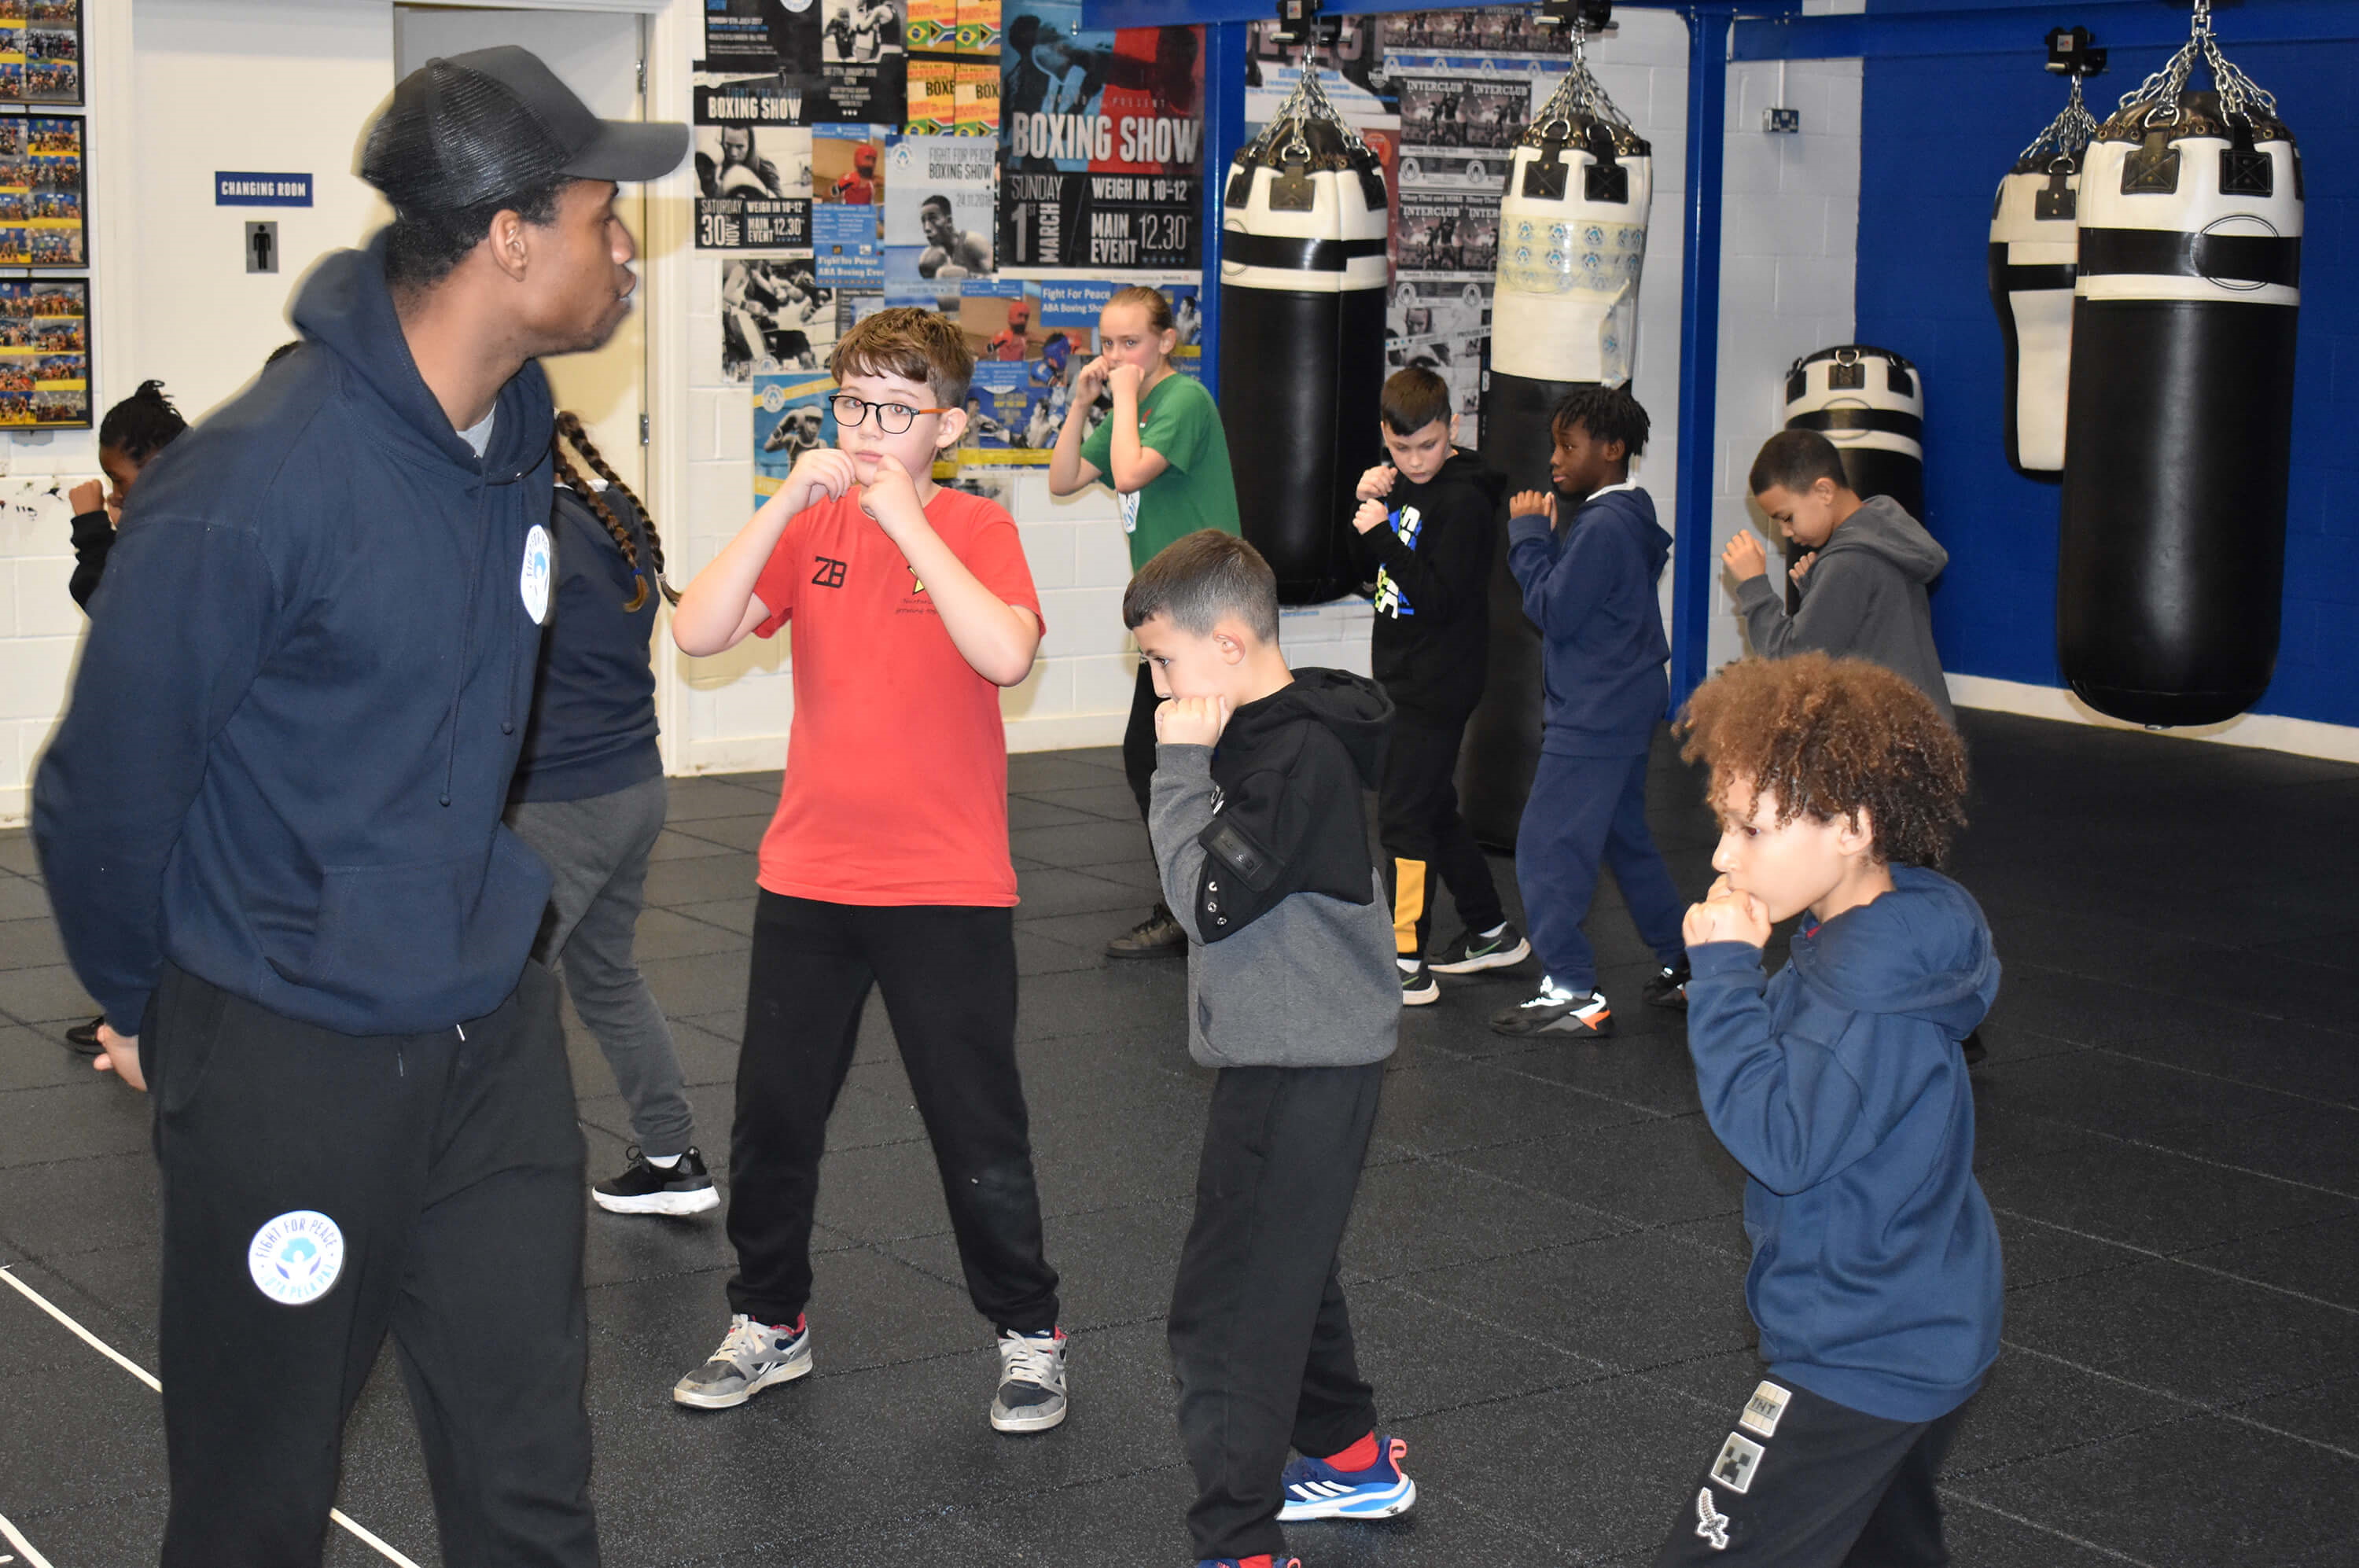 Boxing coach walks in front of his participants passing on advice and encouragement as they train